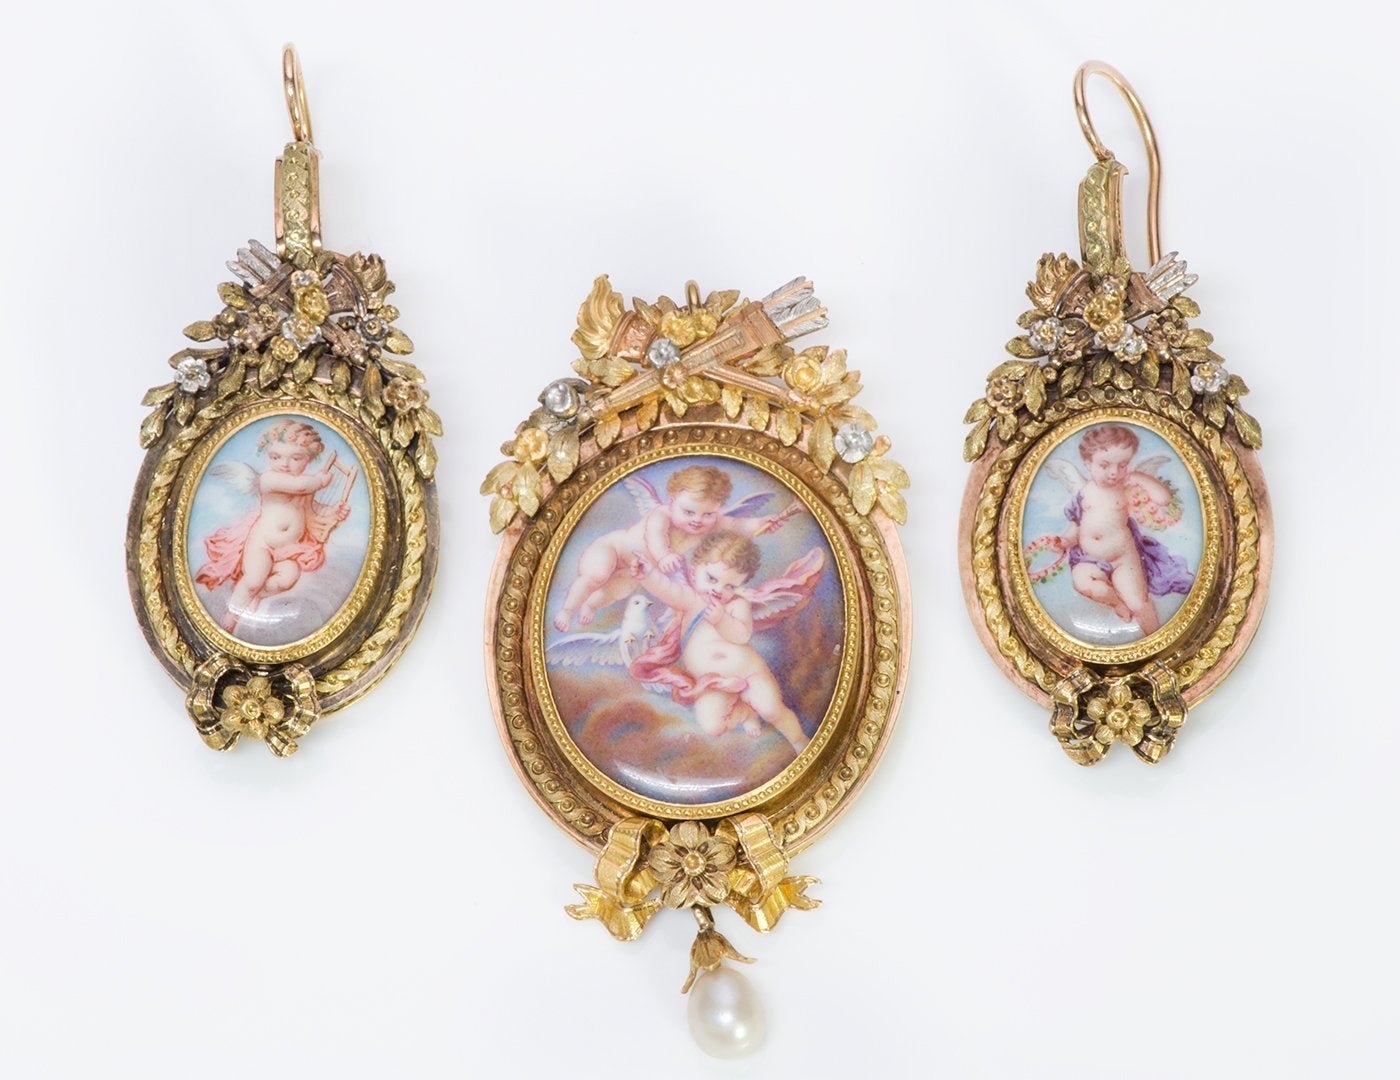 Antique French Gold Cupids Enamel Earrings Pendant Brooch - DSF Antique Jewelry